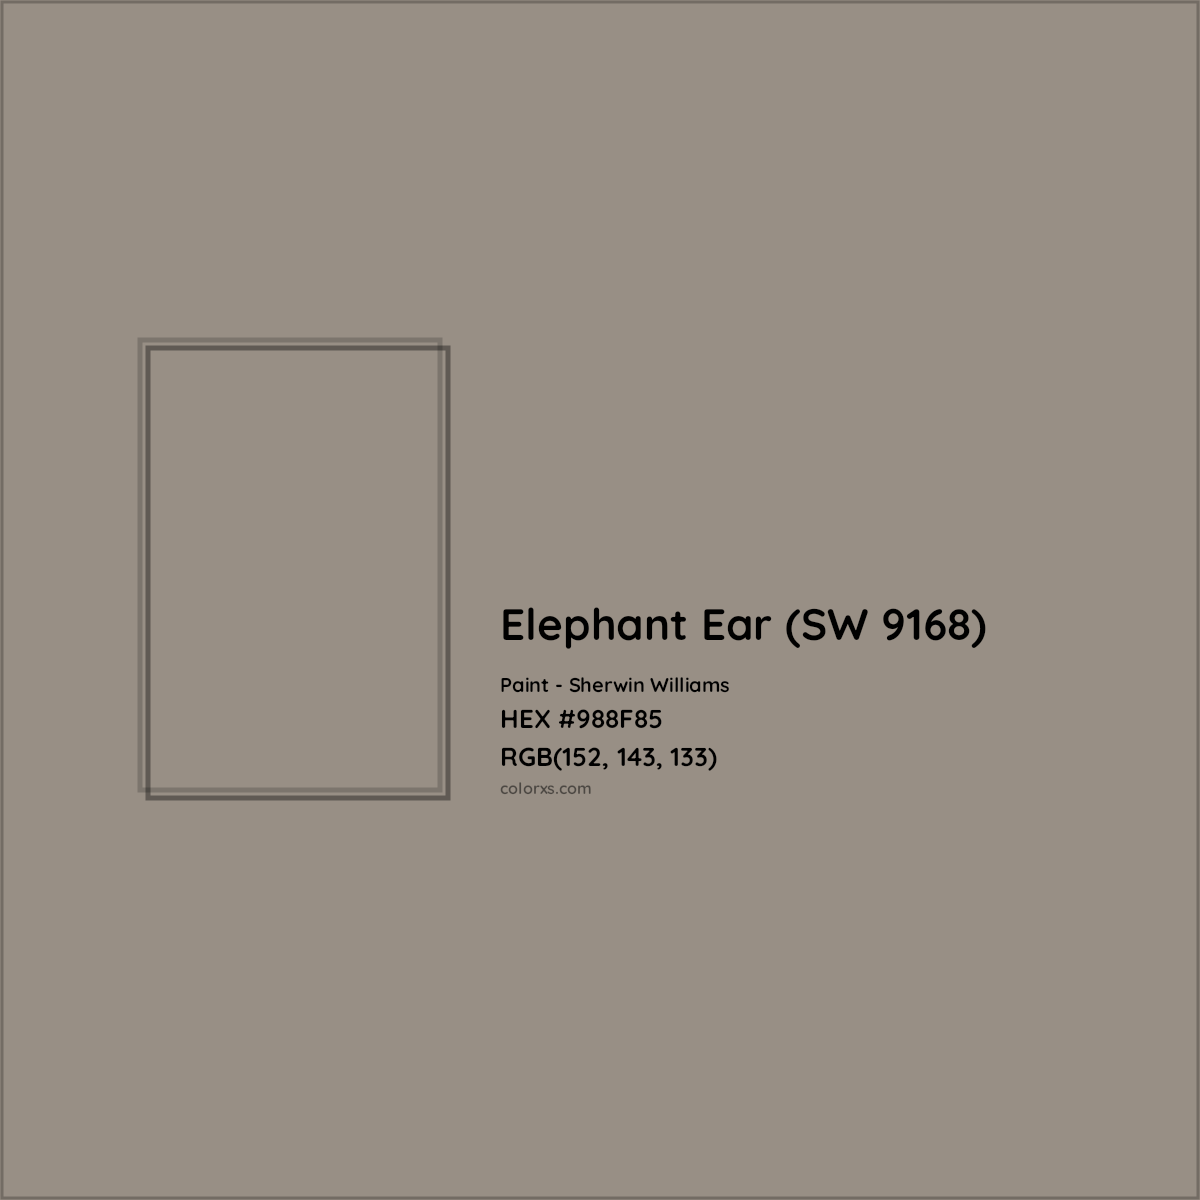 HEX #988F85 Elephant Ear (SW 9168) Paint Sherwin Williams - Color Code